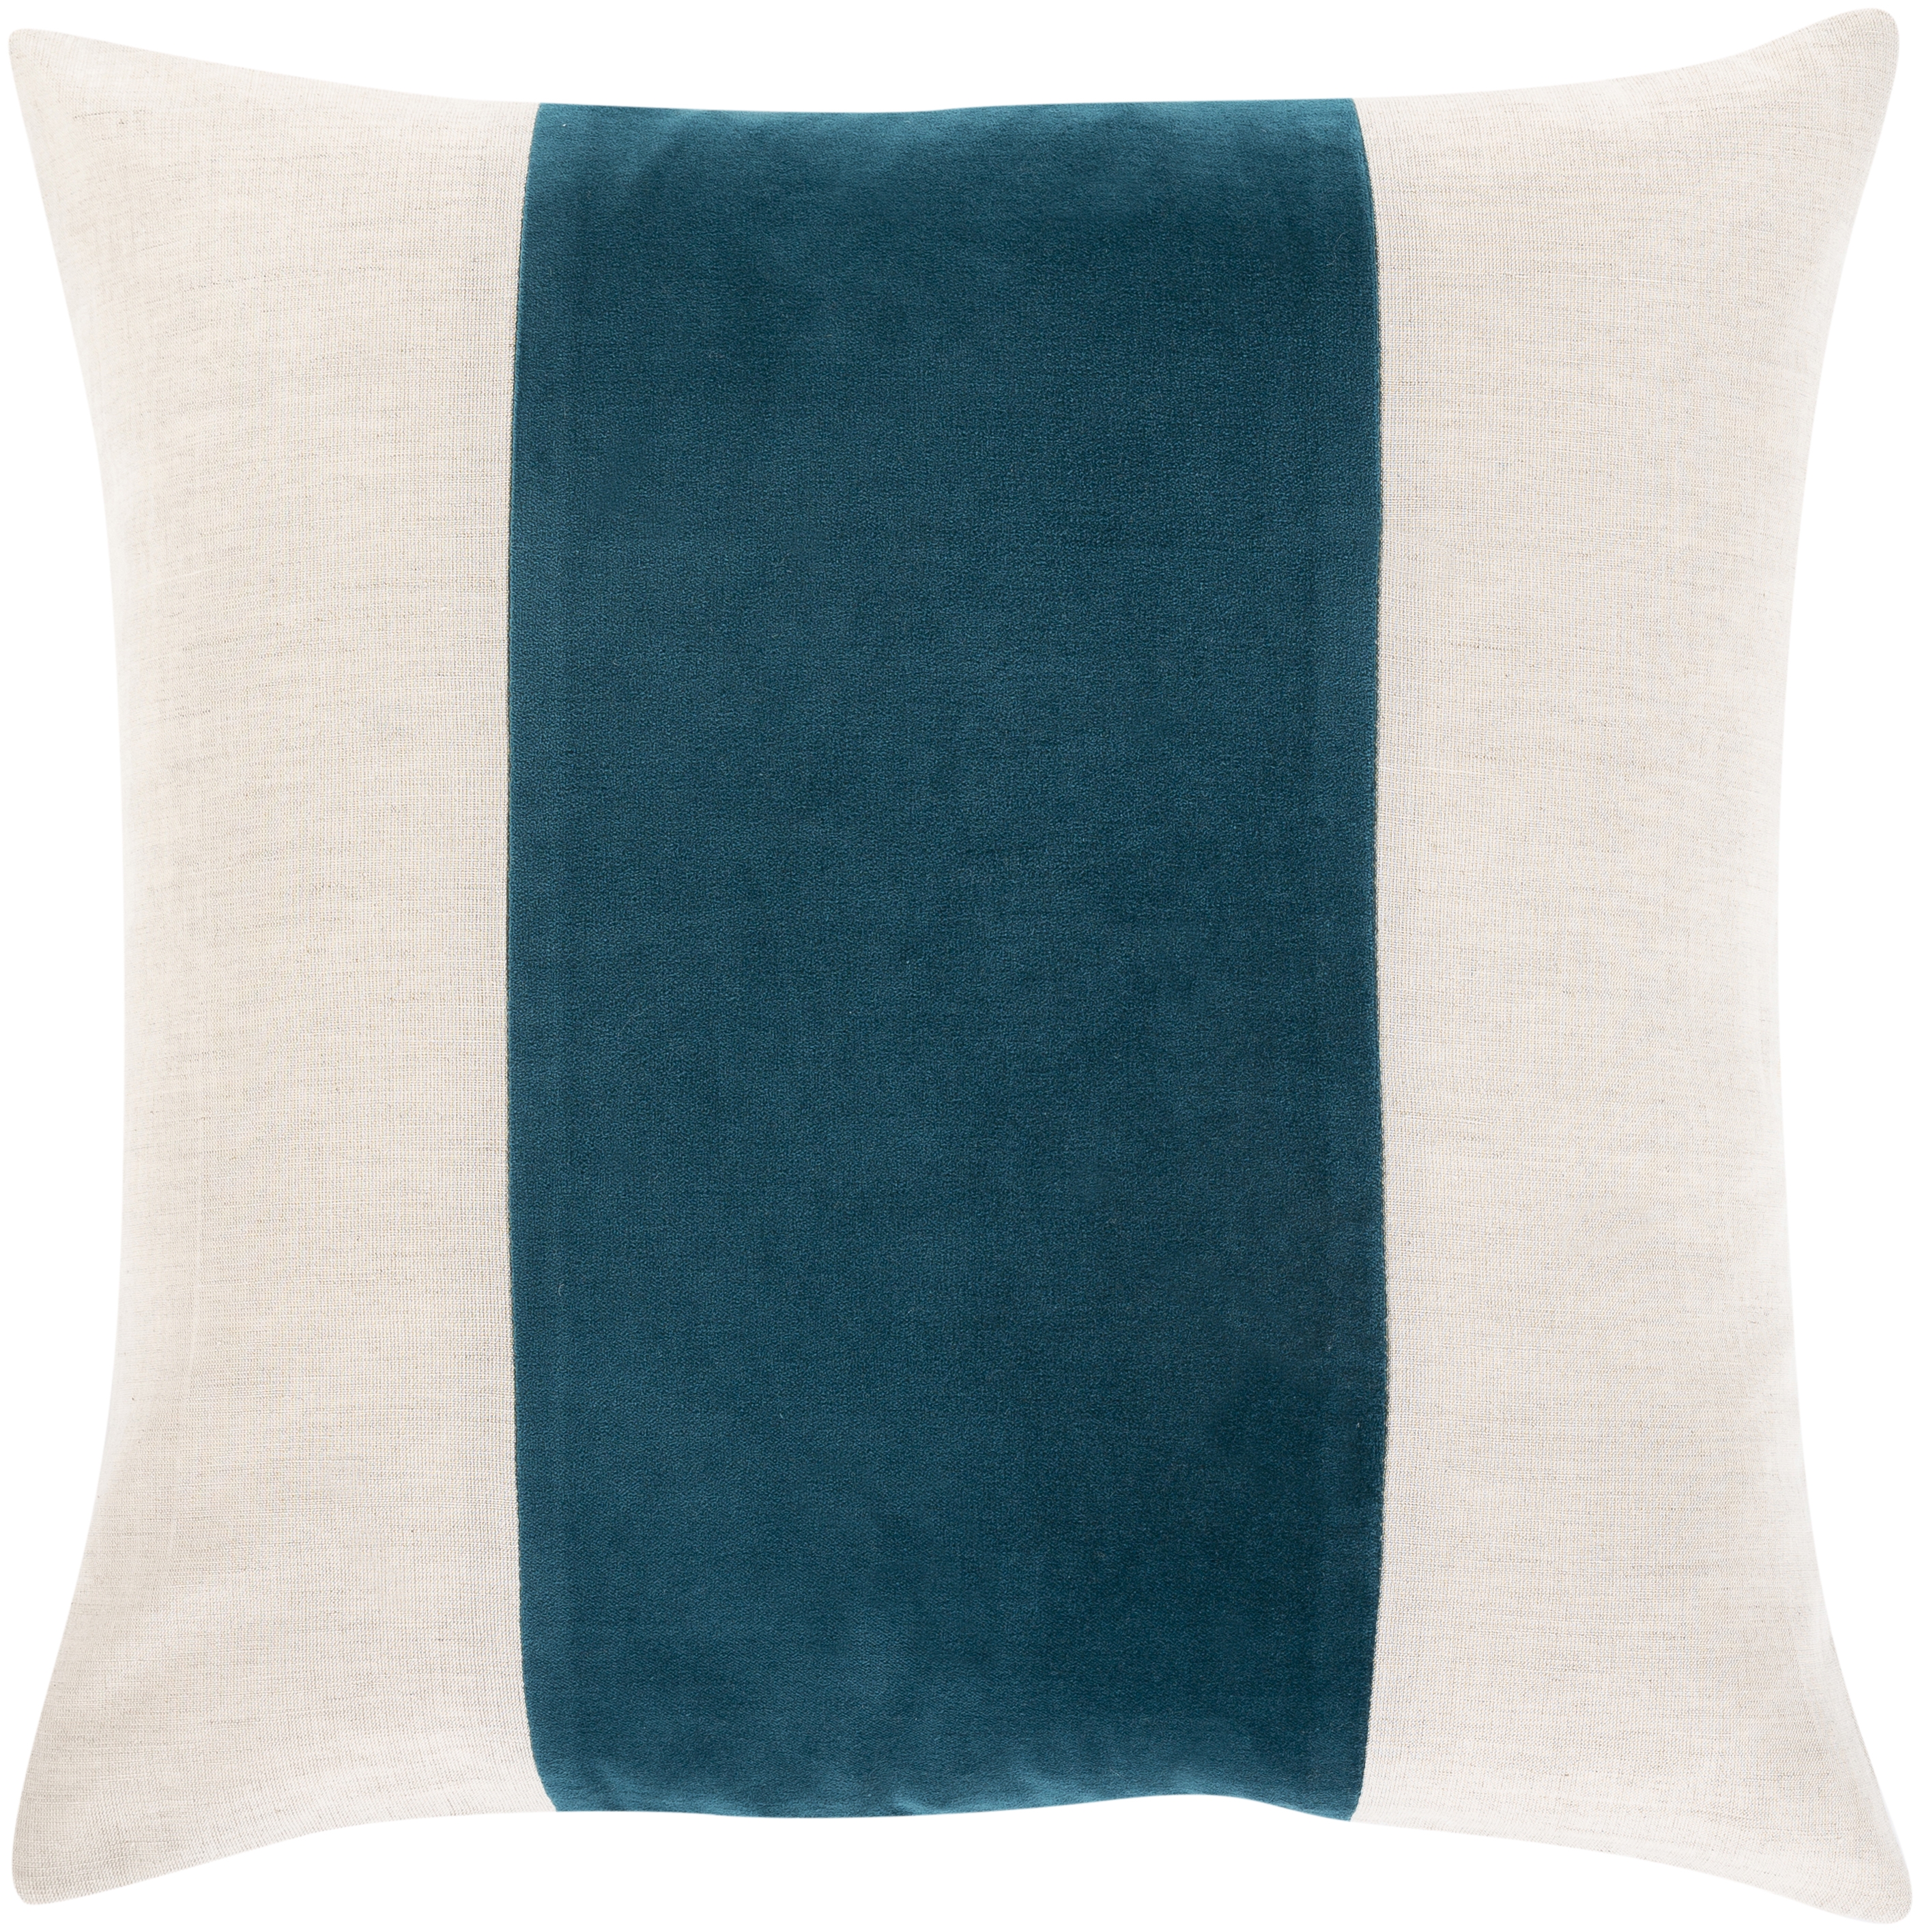 Moza Throw Pillow, 20" x 20", pillow cover only - Image 0